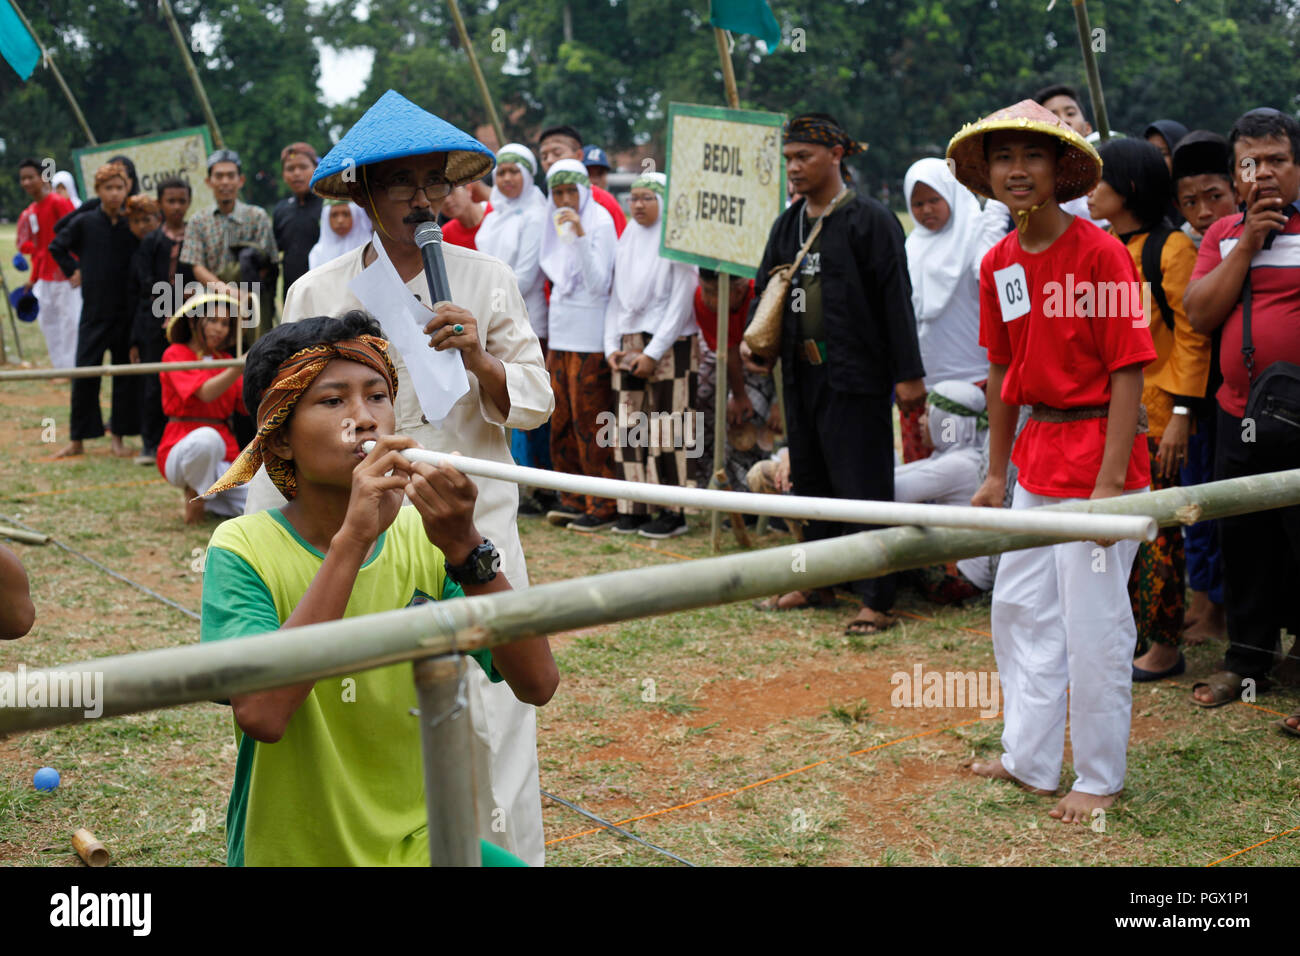 Bogor, Indonesia. 29th Aug, 2018. Indonesian children play traditional Sundanese village games "sumpit", in the sports area of ??Padajaran on the road of General A. Yani, Bogor, West Java, Indonesia. The purpose of the campaign is to return traditional games to reduce the use of game applications in gadgets among children and continue to carry the value of cultural traditions. Credit: Adriana Adinandra/Pacific Press/Alamy Live News Stock Photo